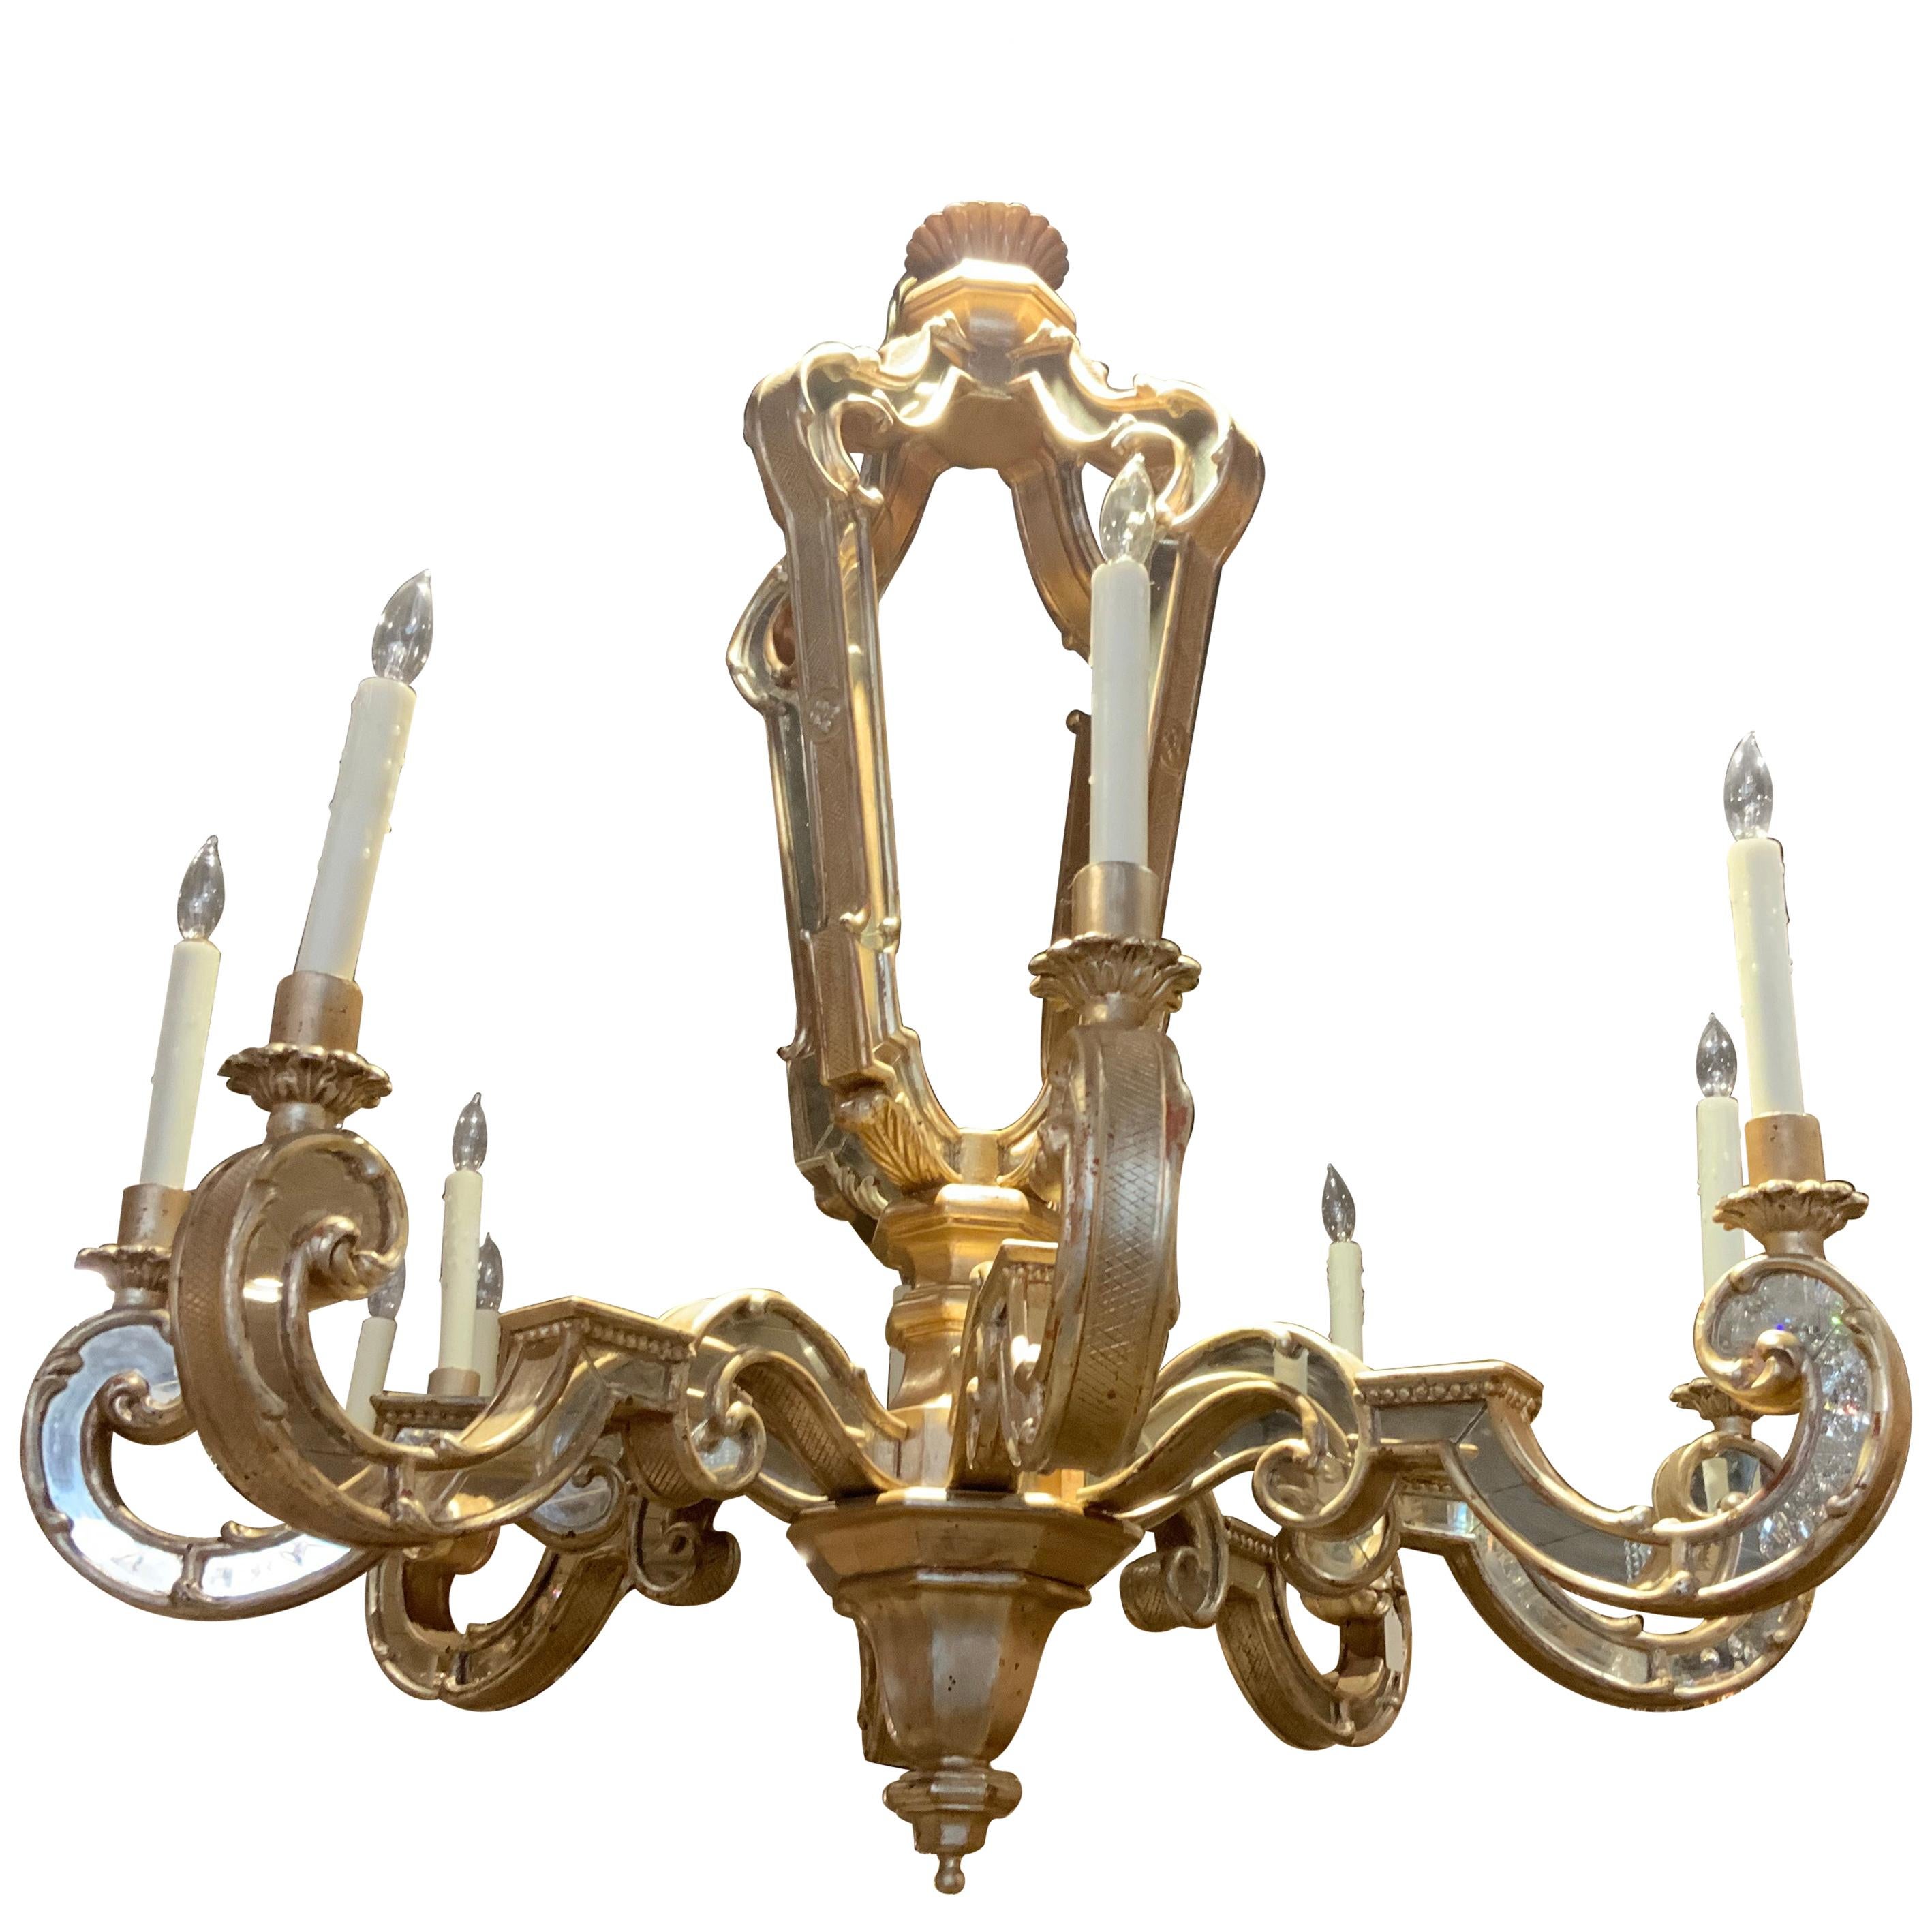 Silver Leaf Wood Carved Chandelier with Mirrors Inlaid and Scrolling Arms